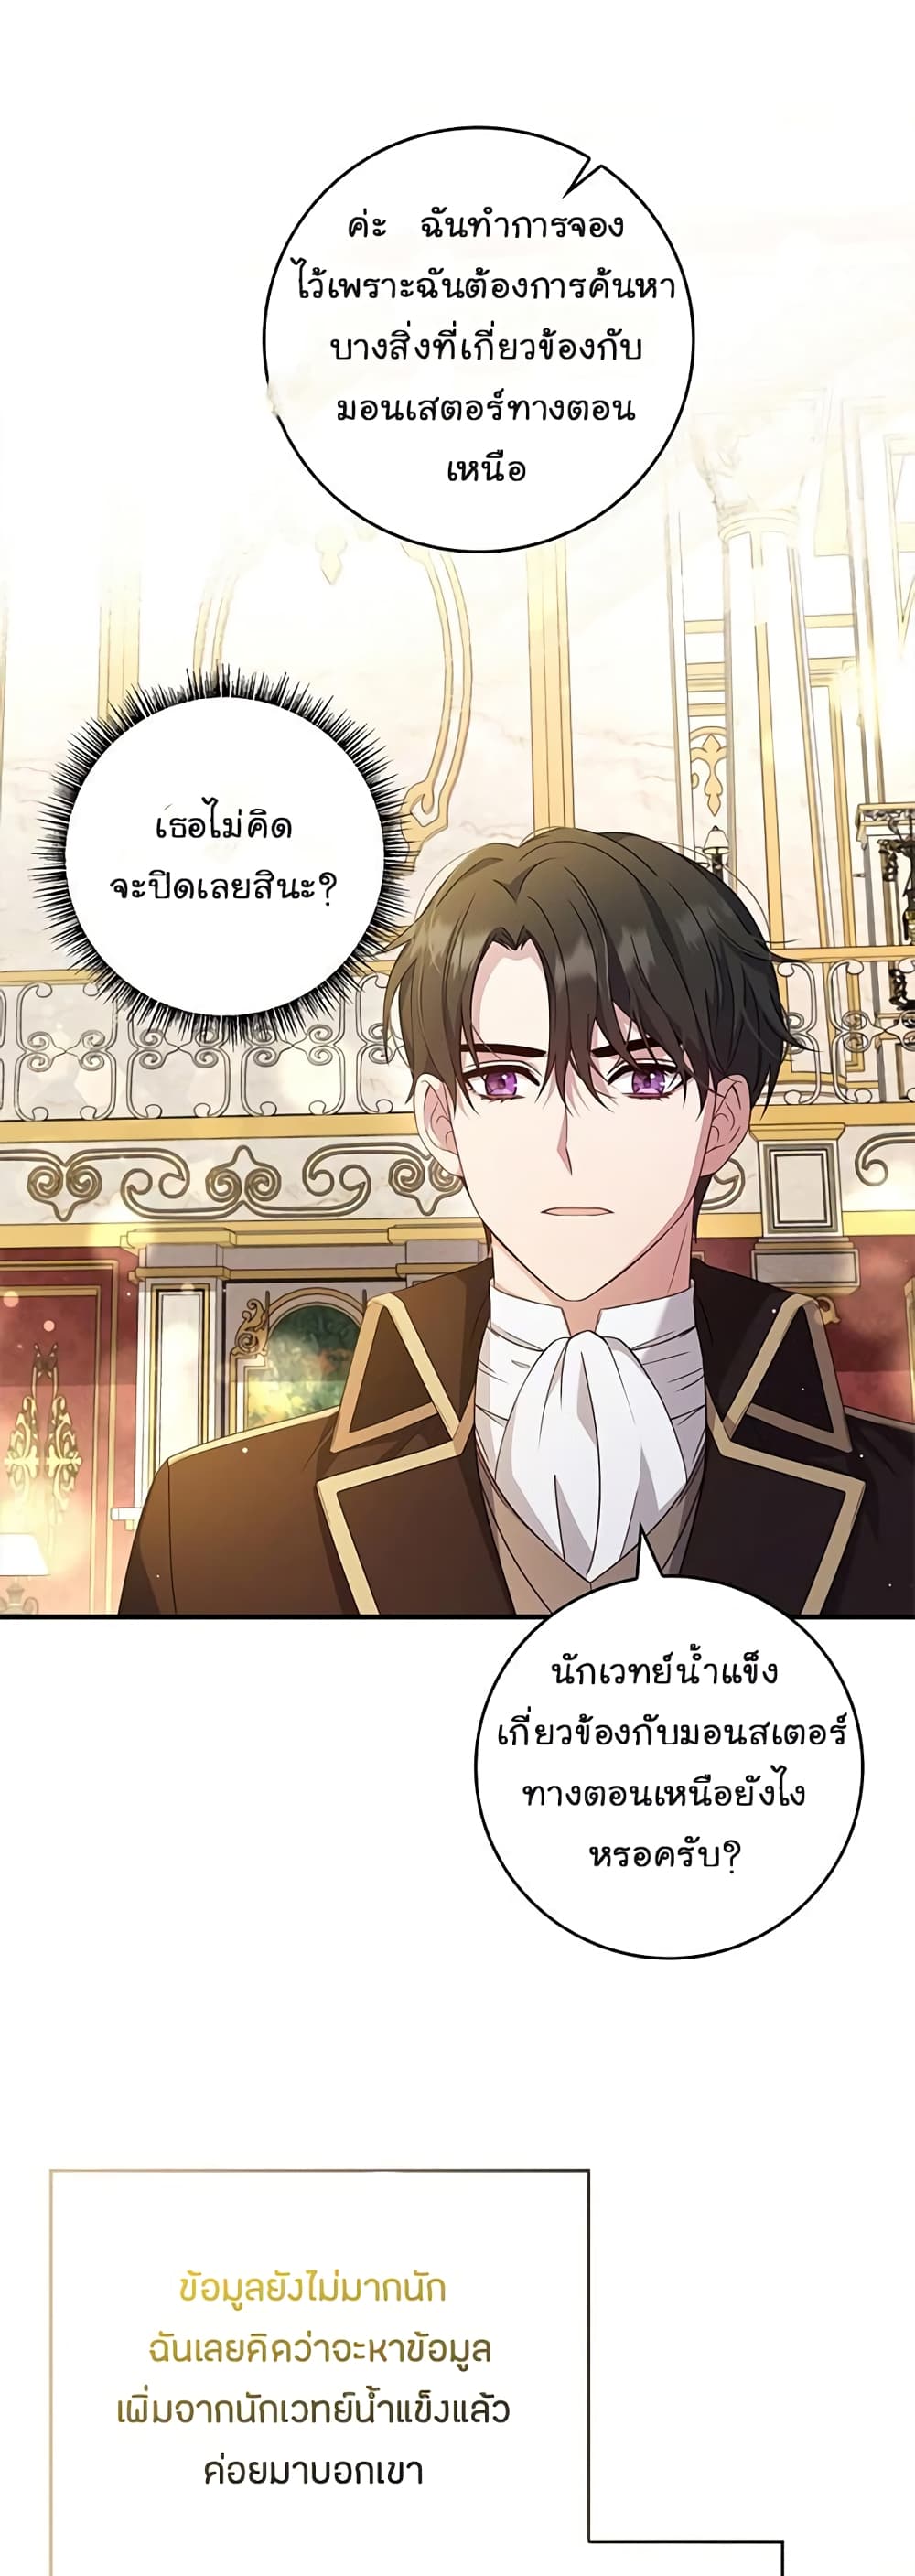 Fakes Don’t Want To Be Real ตอนที่ 9 (6)